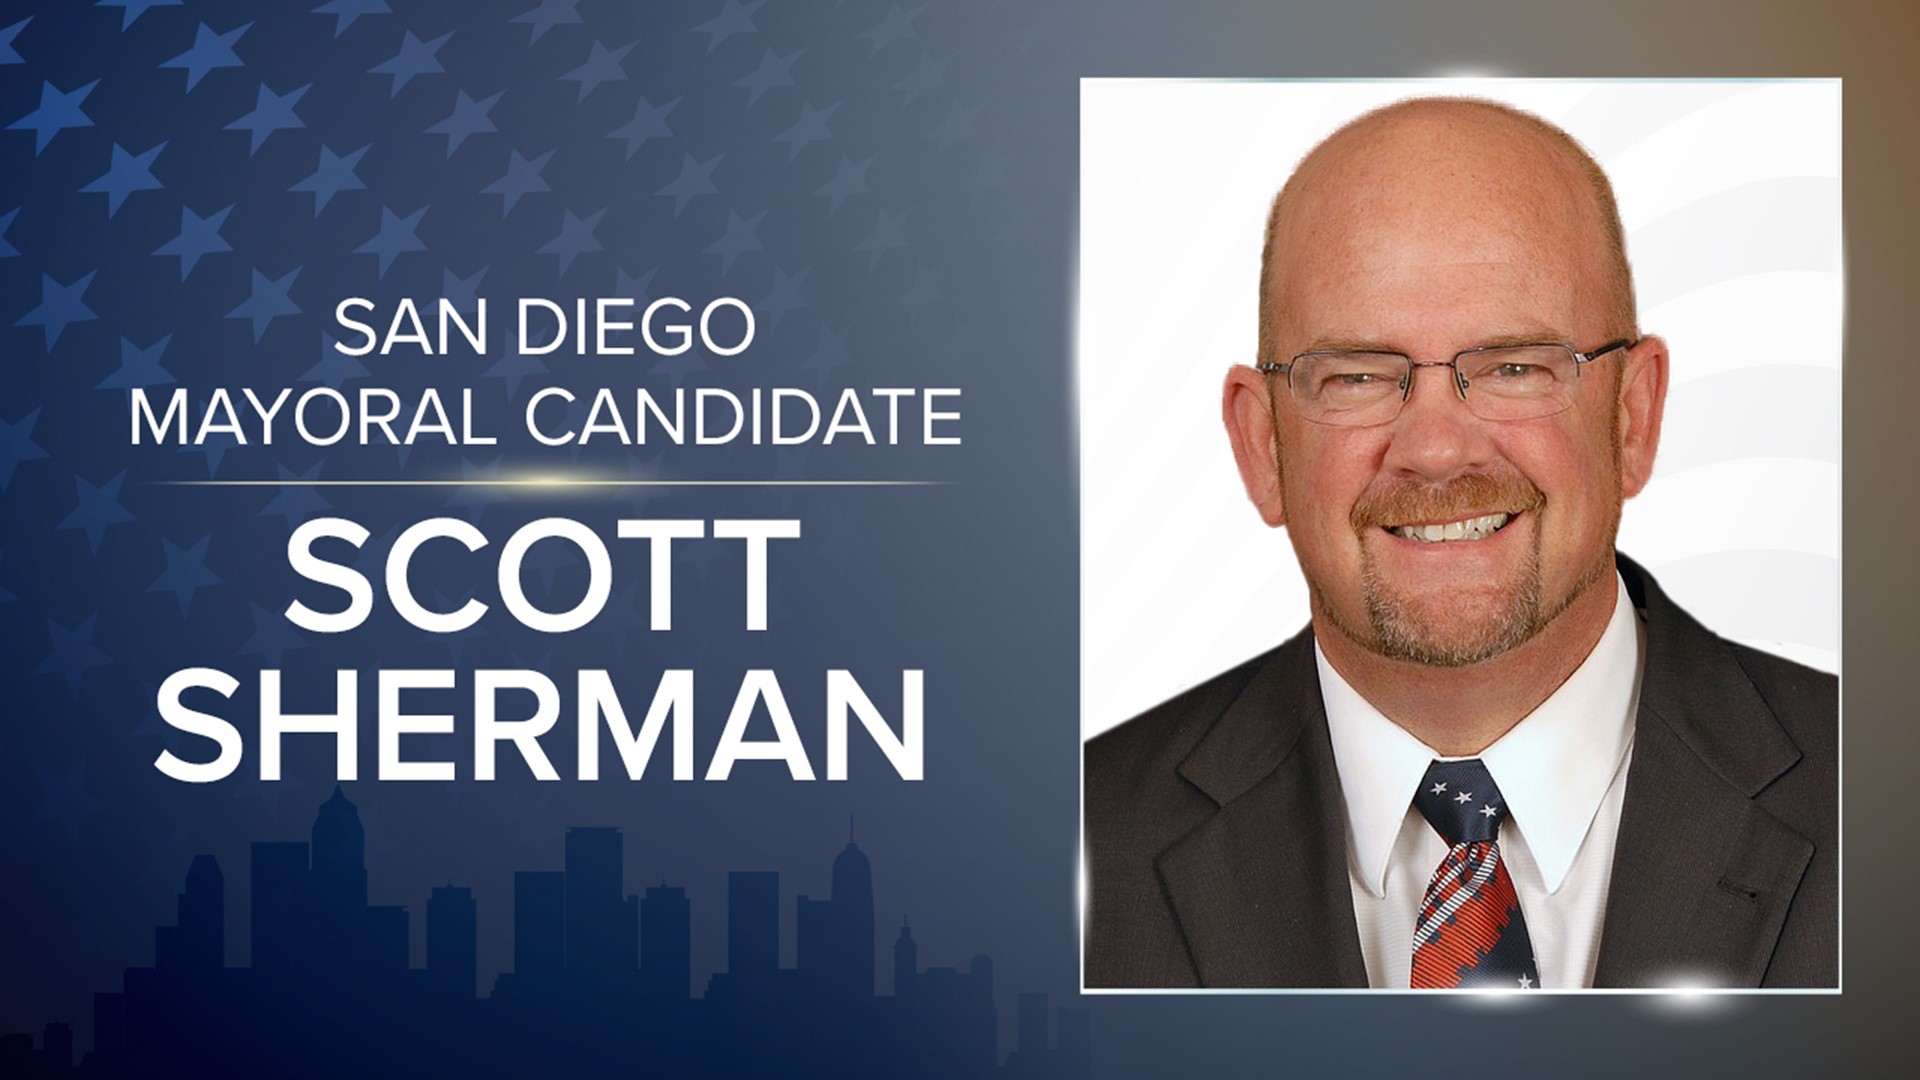 San Diegans will choose a new mayor on Tuesday, November 3. Hear what the candidates had to say.